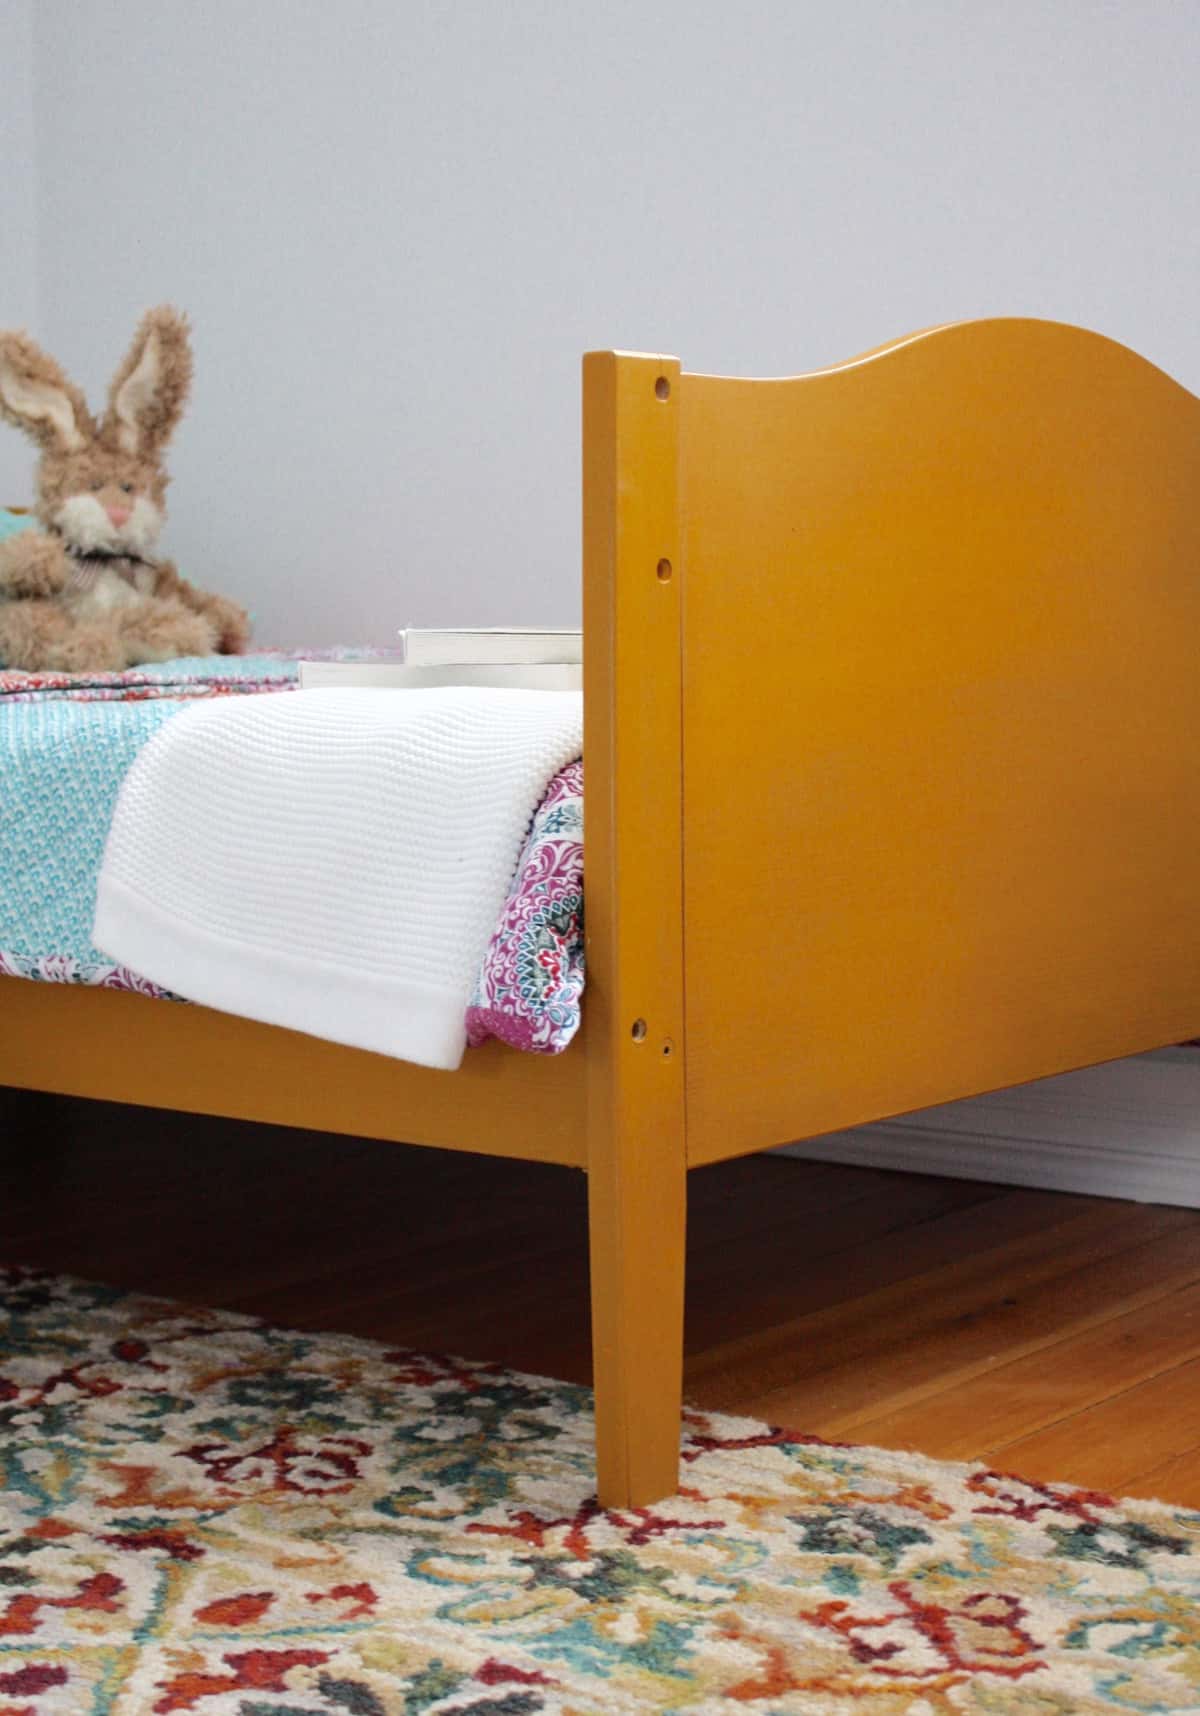 Adorable Toddler Bed {guest post} #DIY #paintedfurniture #furniturepaint #countrychicpaint #homedecor - blog.countrychicpaint.com